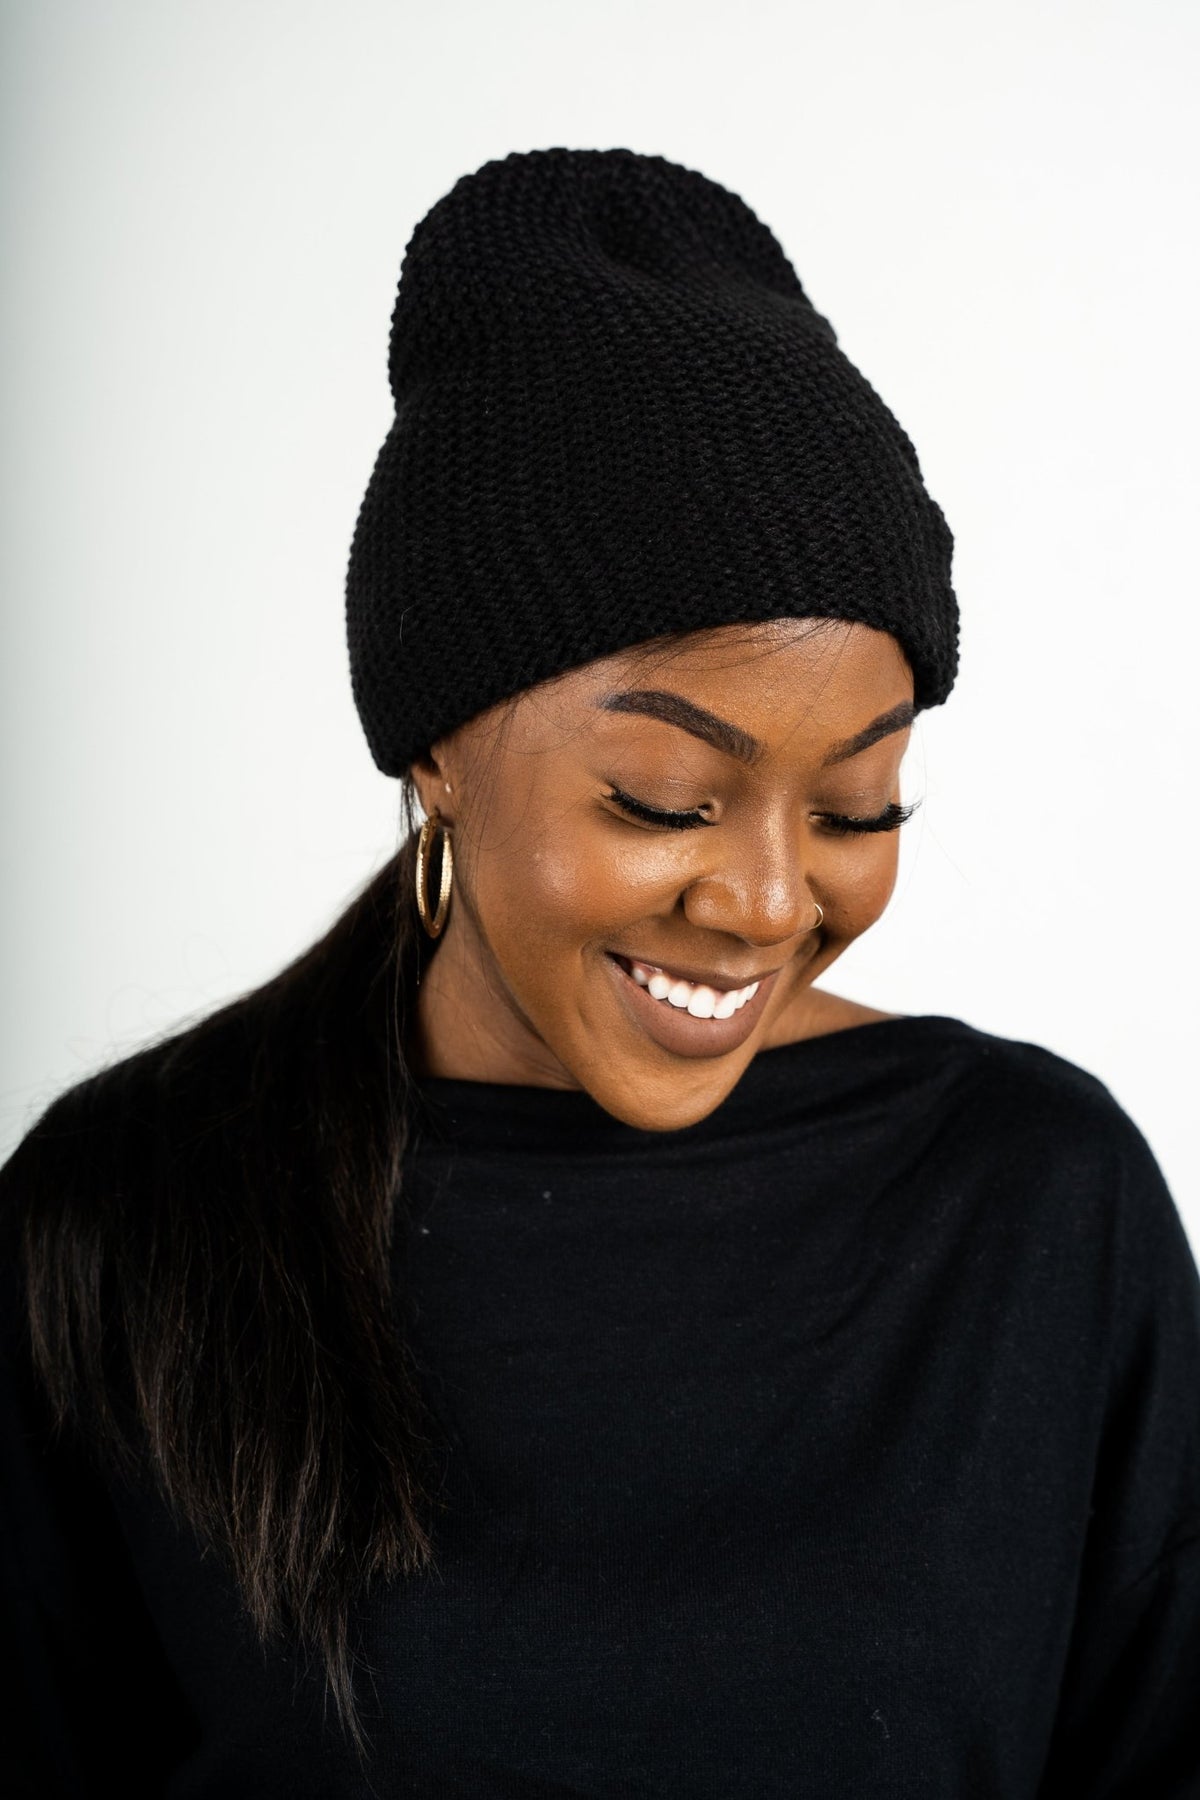 Textured slouchy beanie black - Trendy Beanies at Lush Fashion Lounge Boutique in Oklahoma City